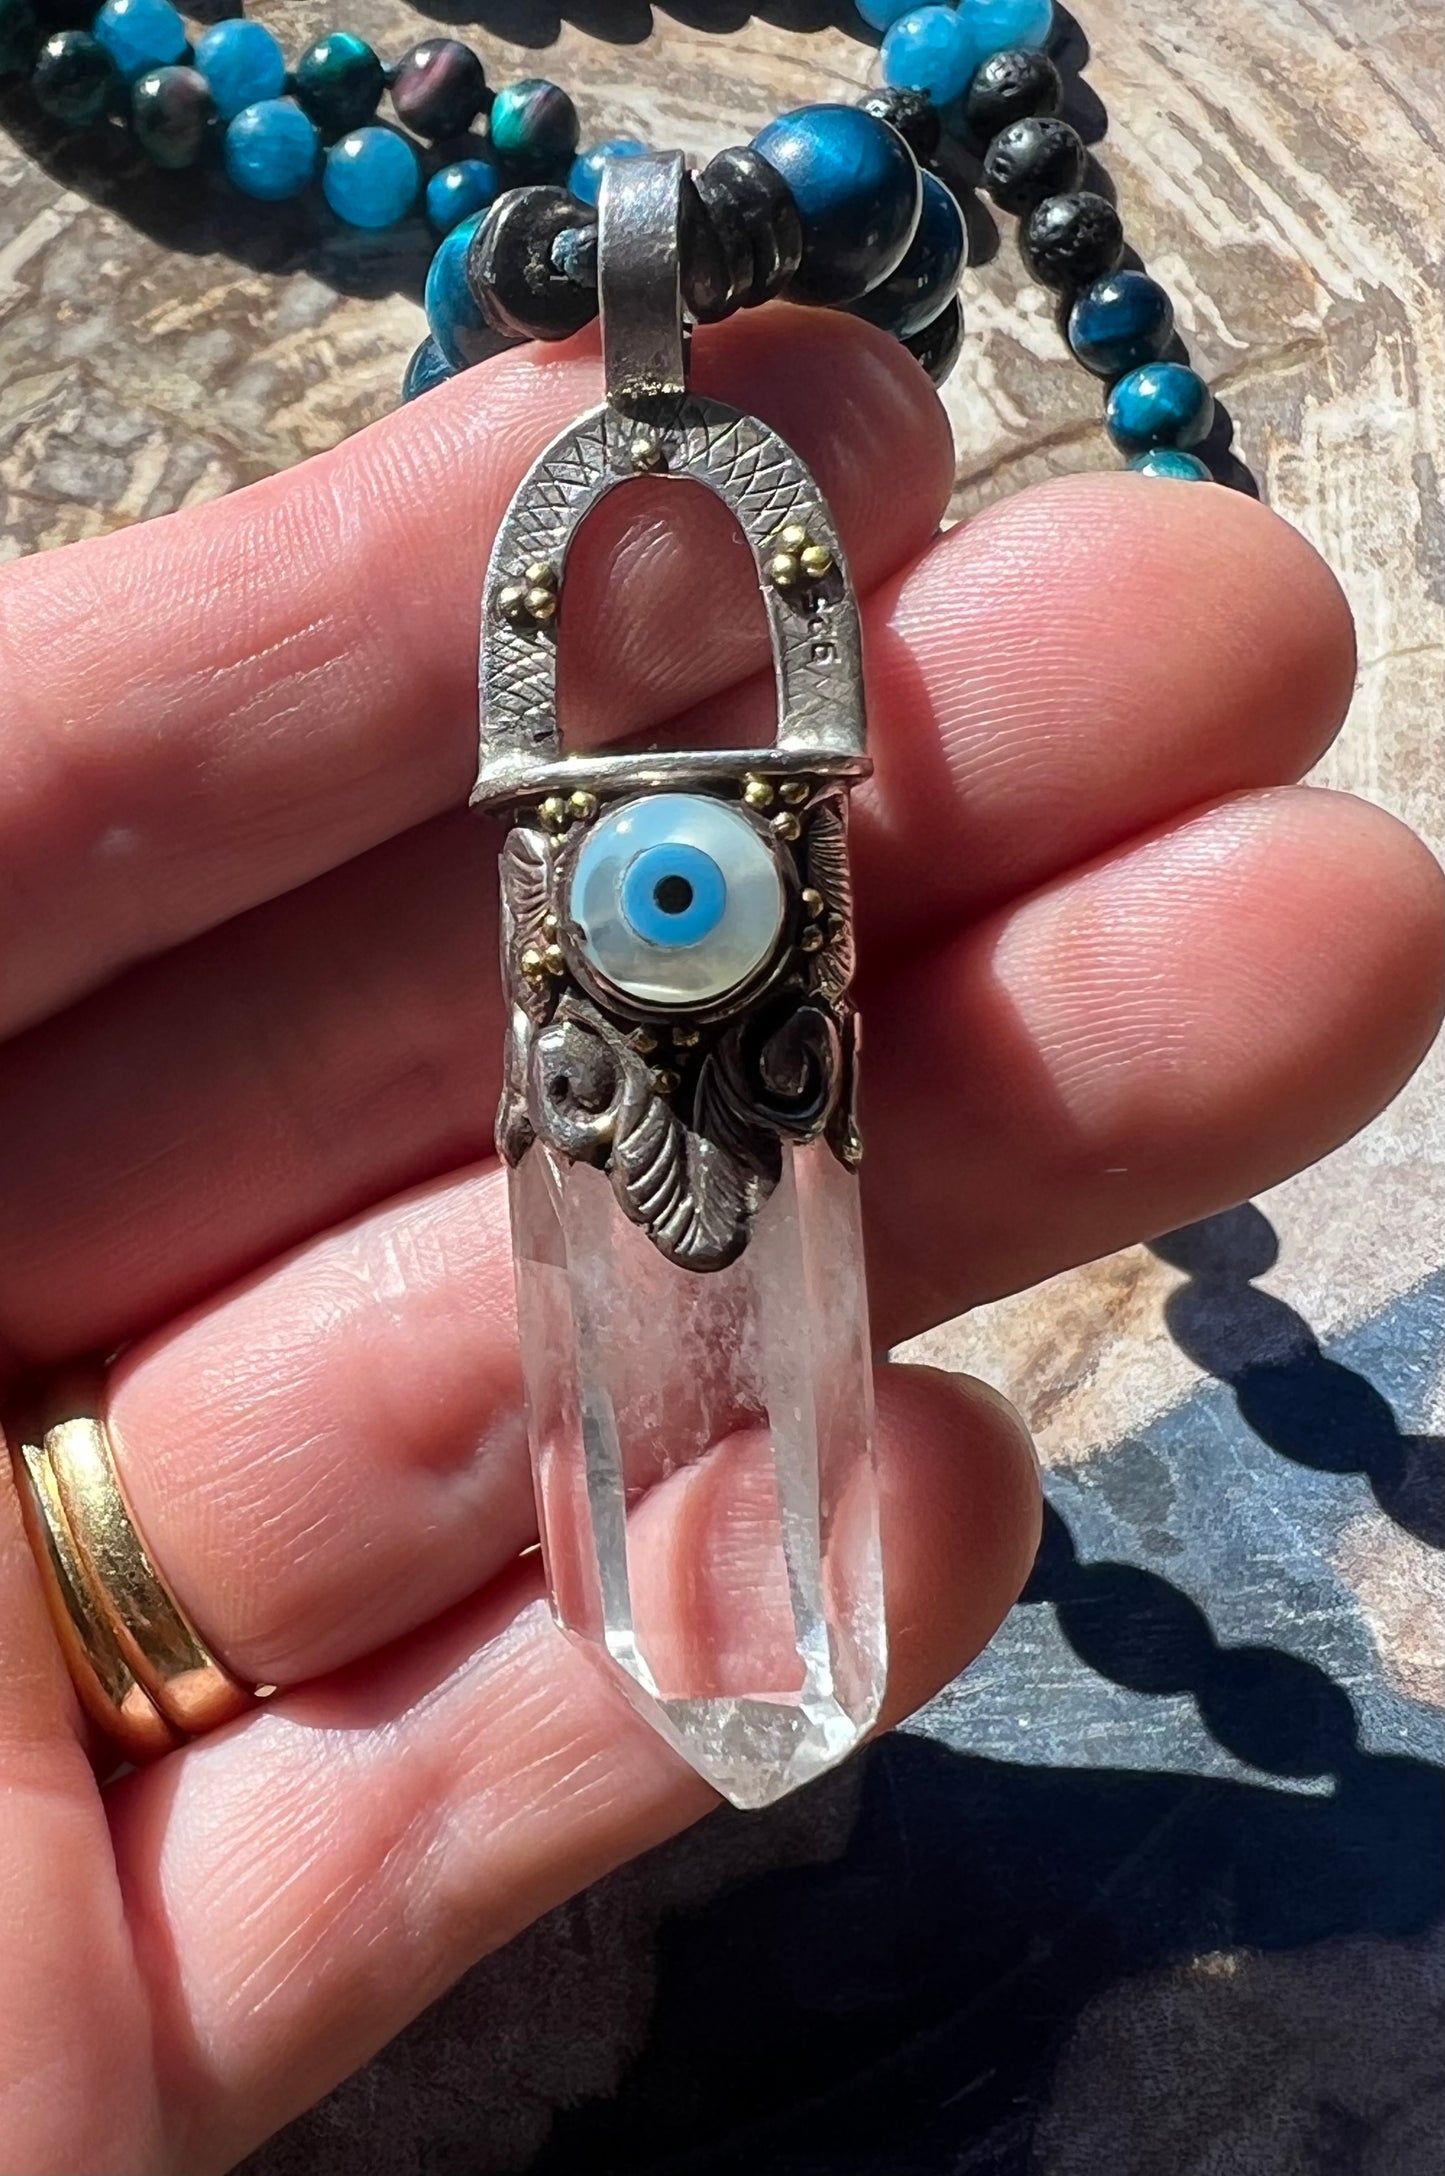 Mālā with Tigers Eye, Apatite Beads and a Clear Quartz Pendant